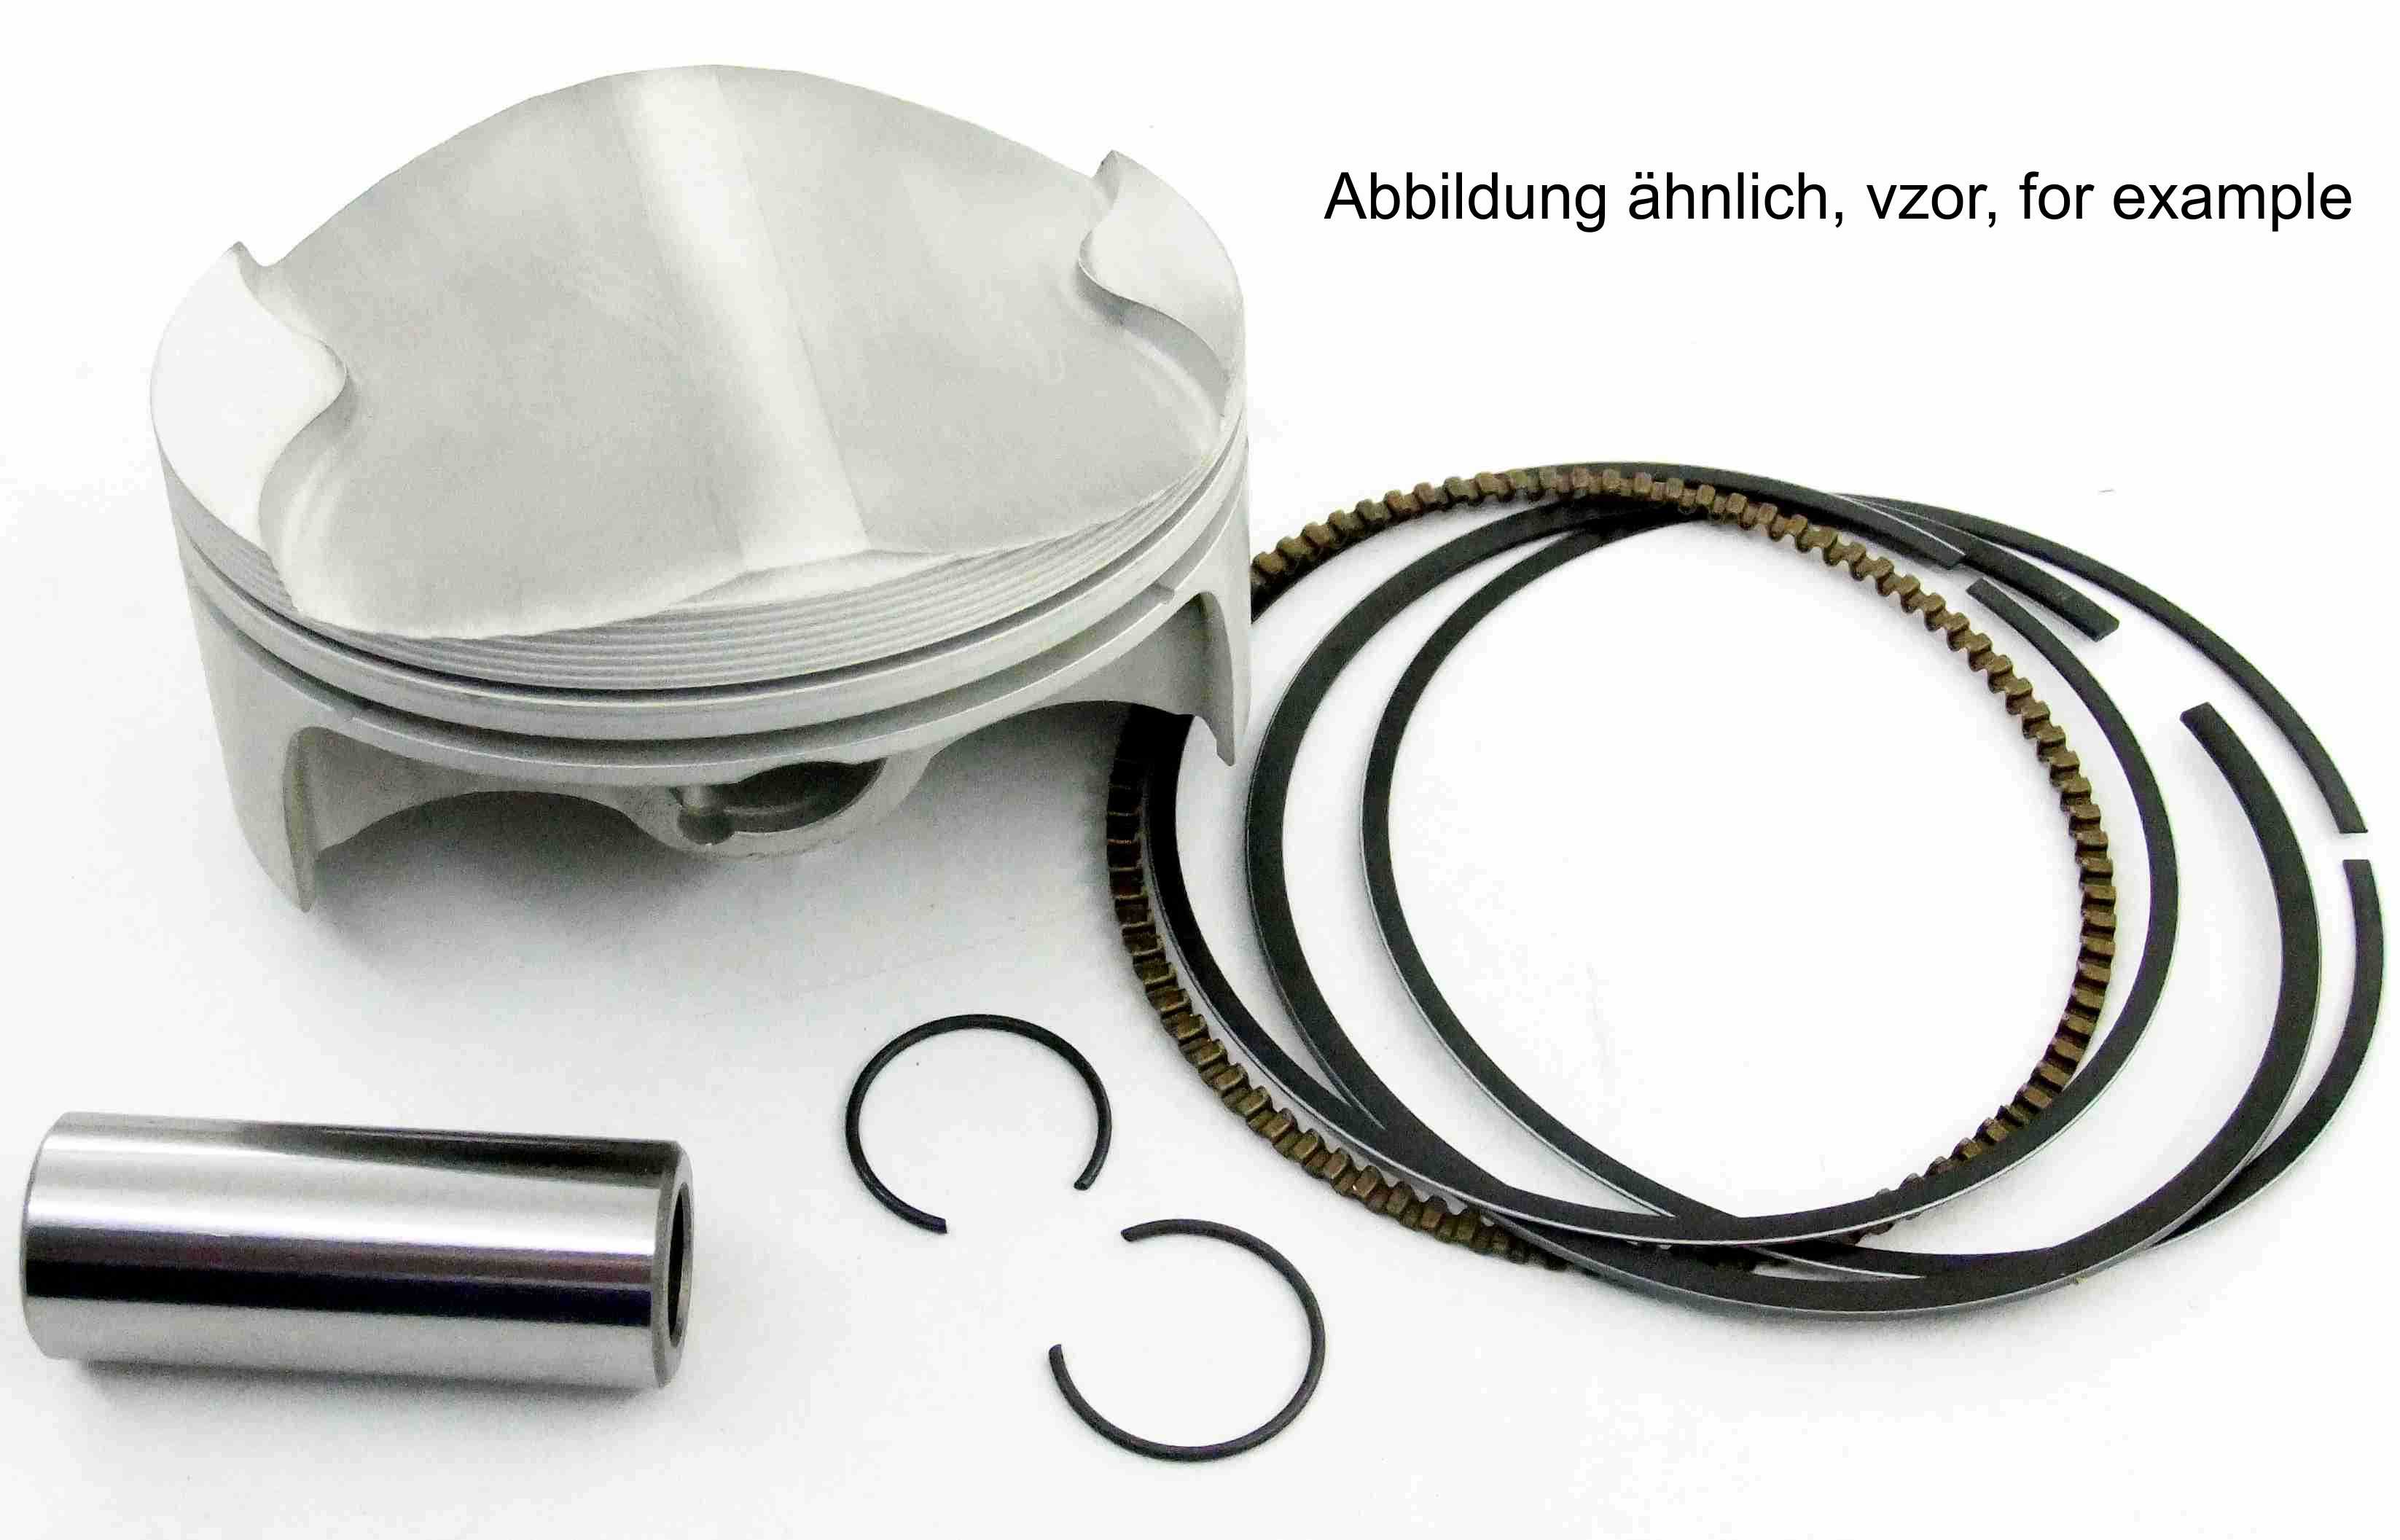 SCHREMS PISTON KIT FORGED, HIGH COMPR. 13.5:1 TRX 450R 06- 95.97 MM